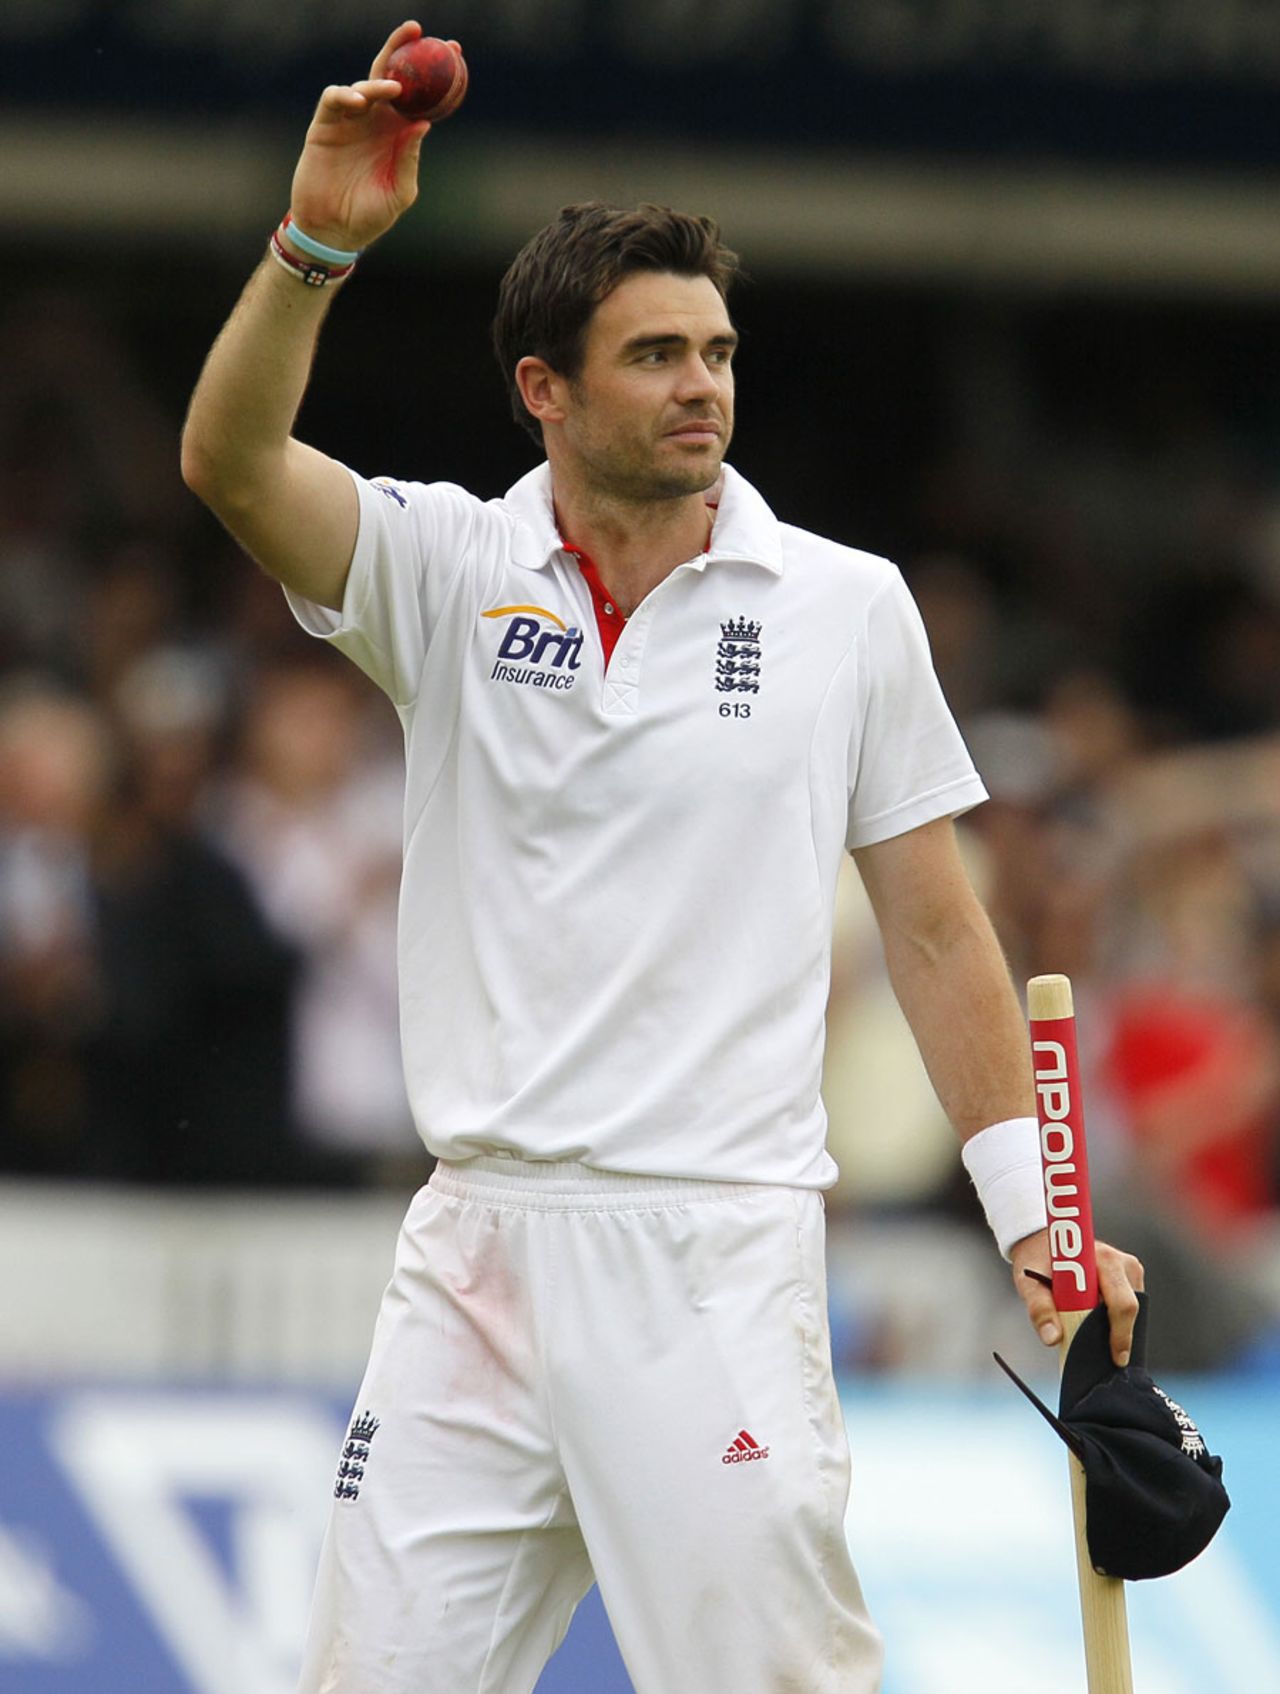 James Anderson keeps the ball as a souvenir after his five-for, England v India, 1st Test, Lord's, 5th day, July 25, 2011